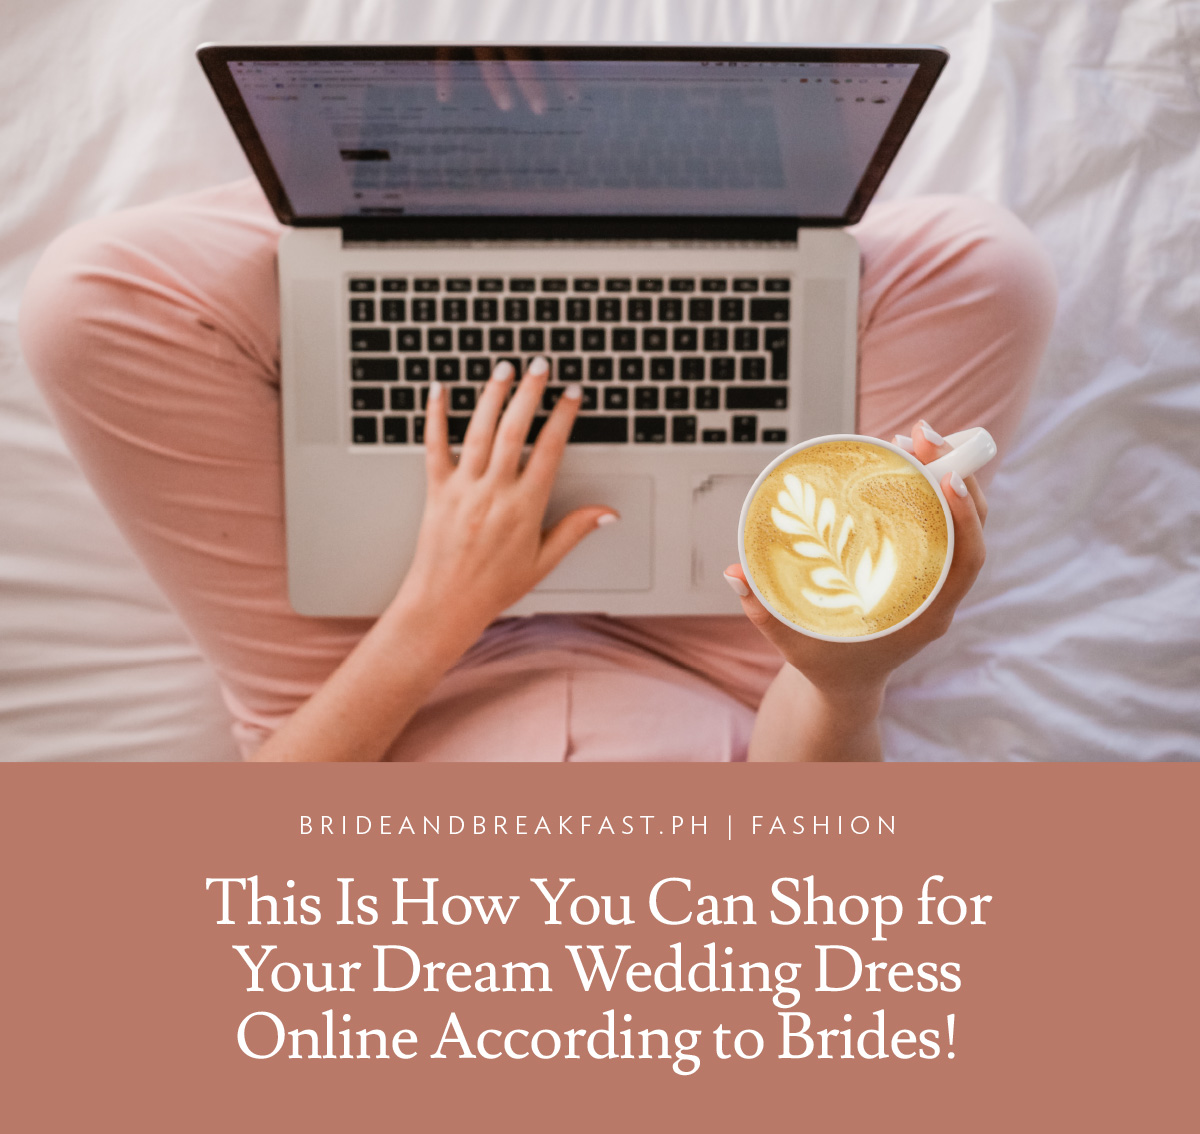 This is How You Can Shop for Your Dream Wedding Dress Online According to Brides!